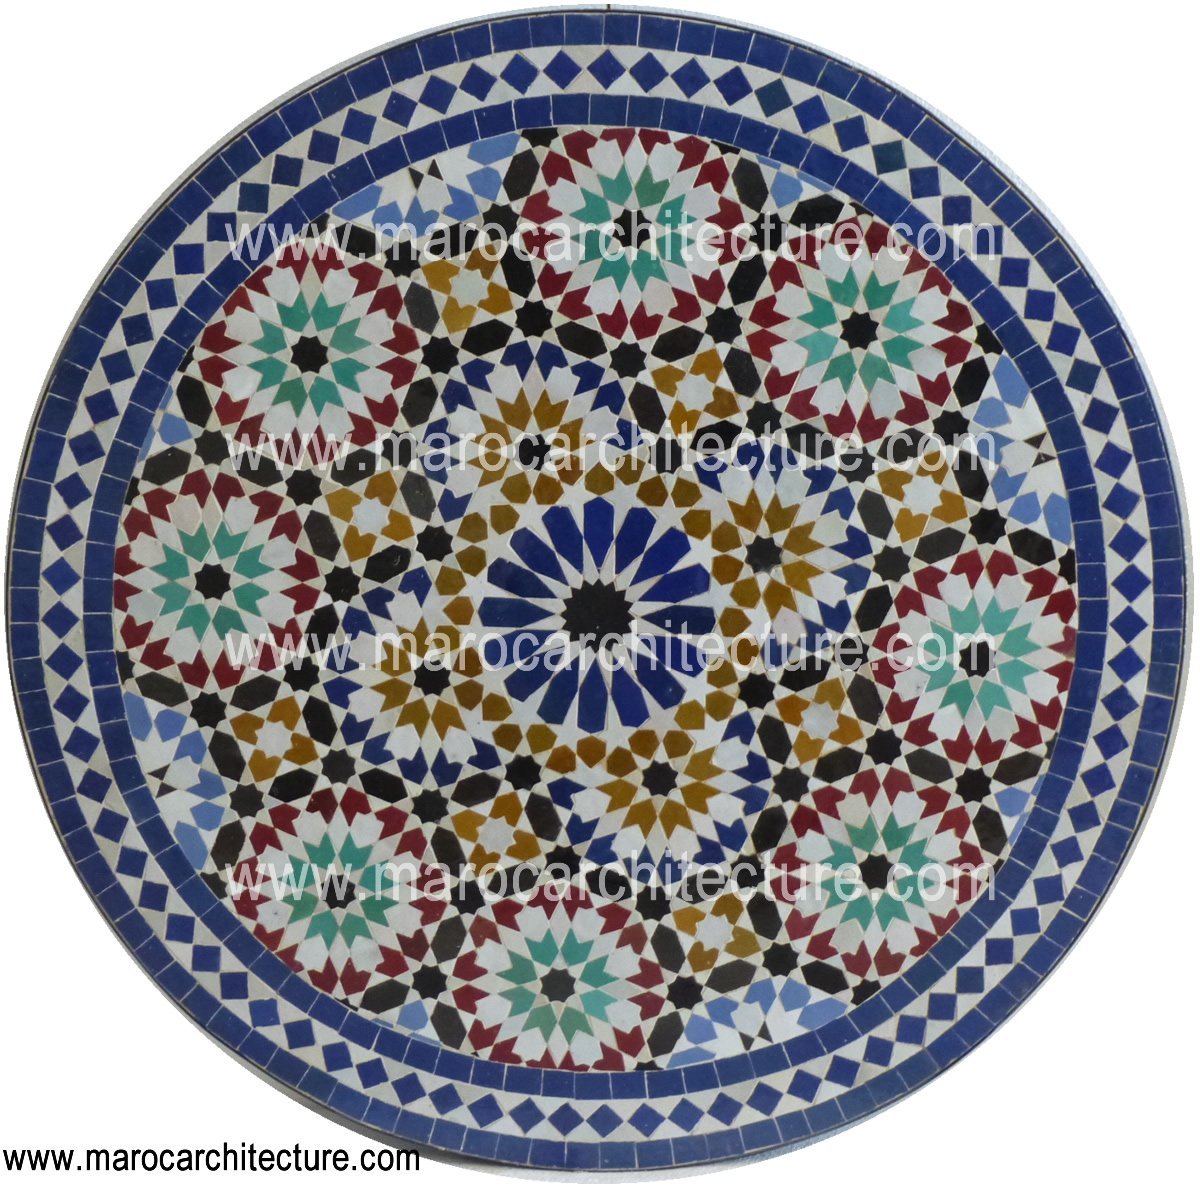 Sixteen Pointed Mosaic Table Top 1908